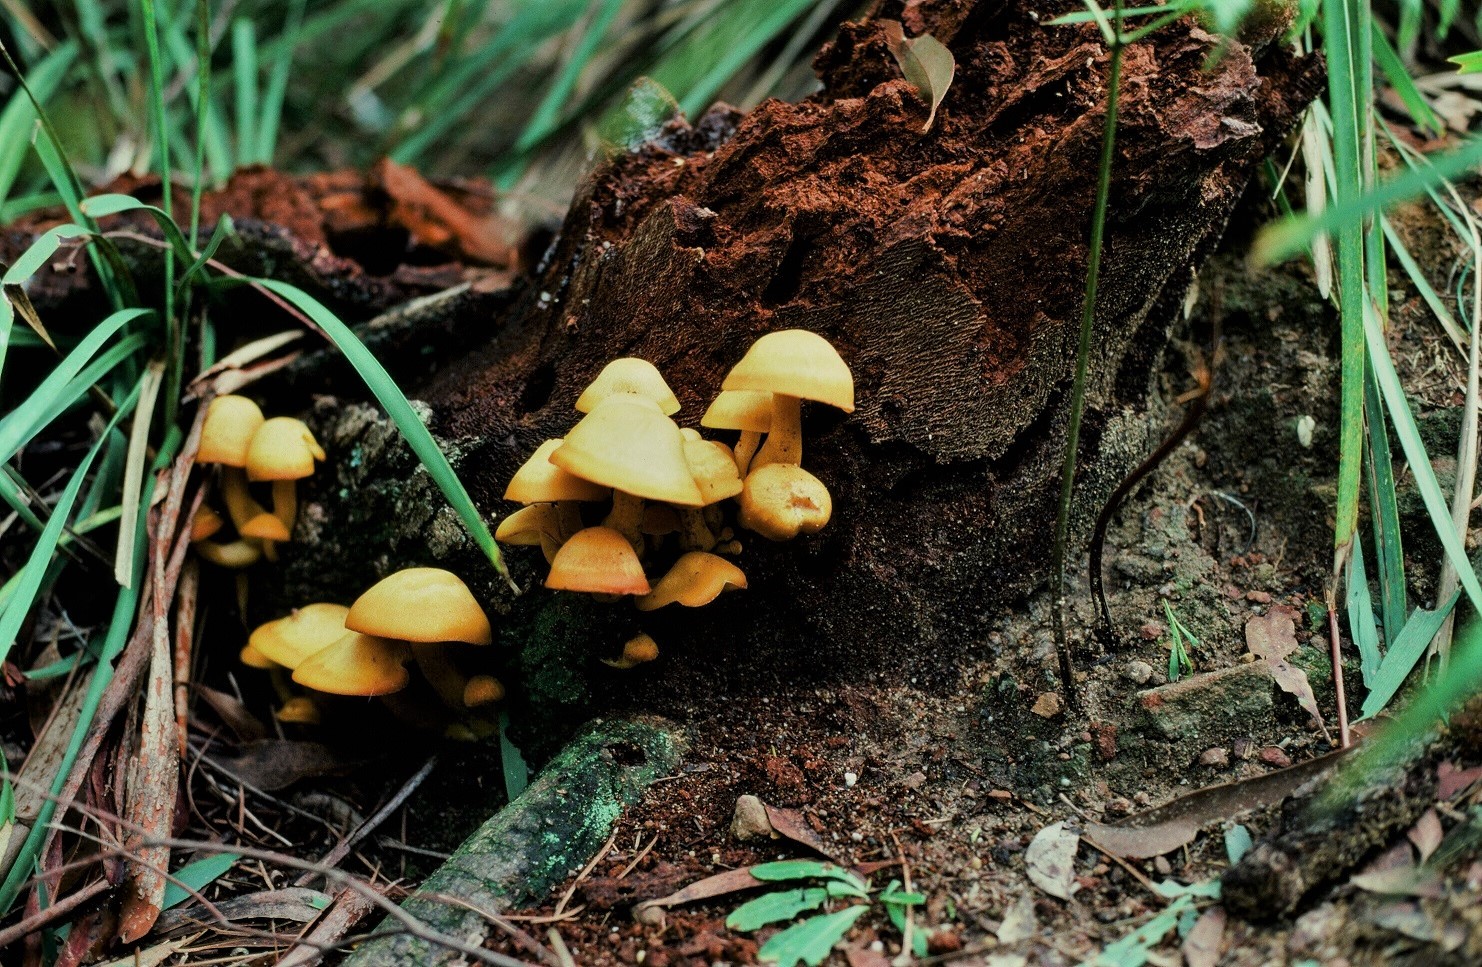 Mushrooms in a South Coast National Park, Australia by lonewolf6738